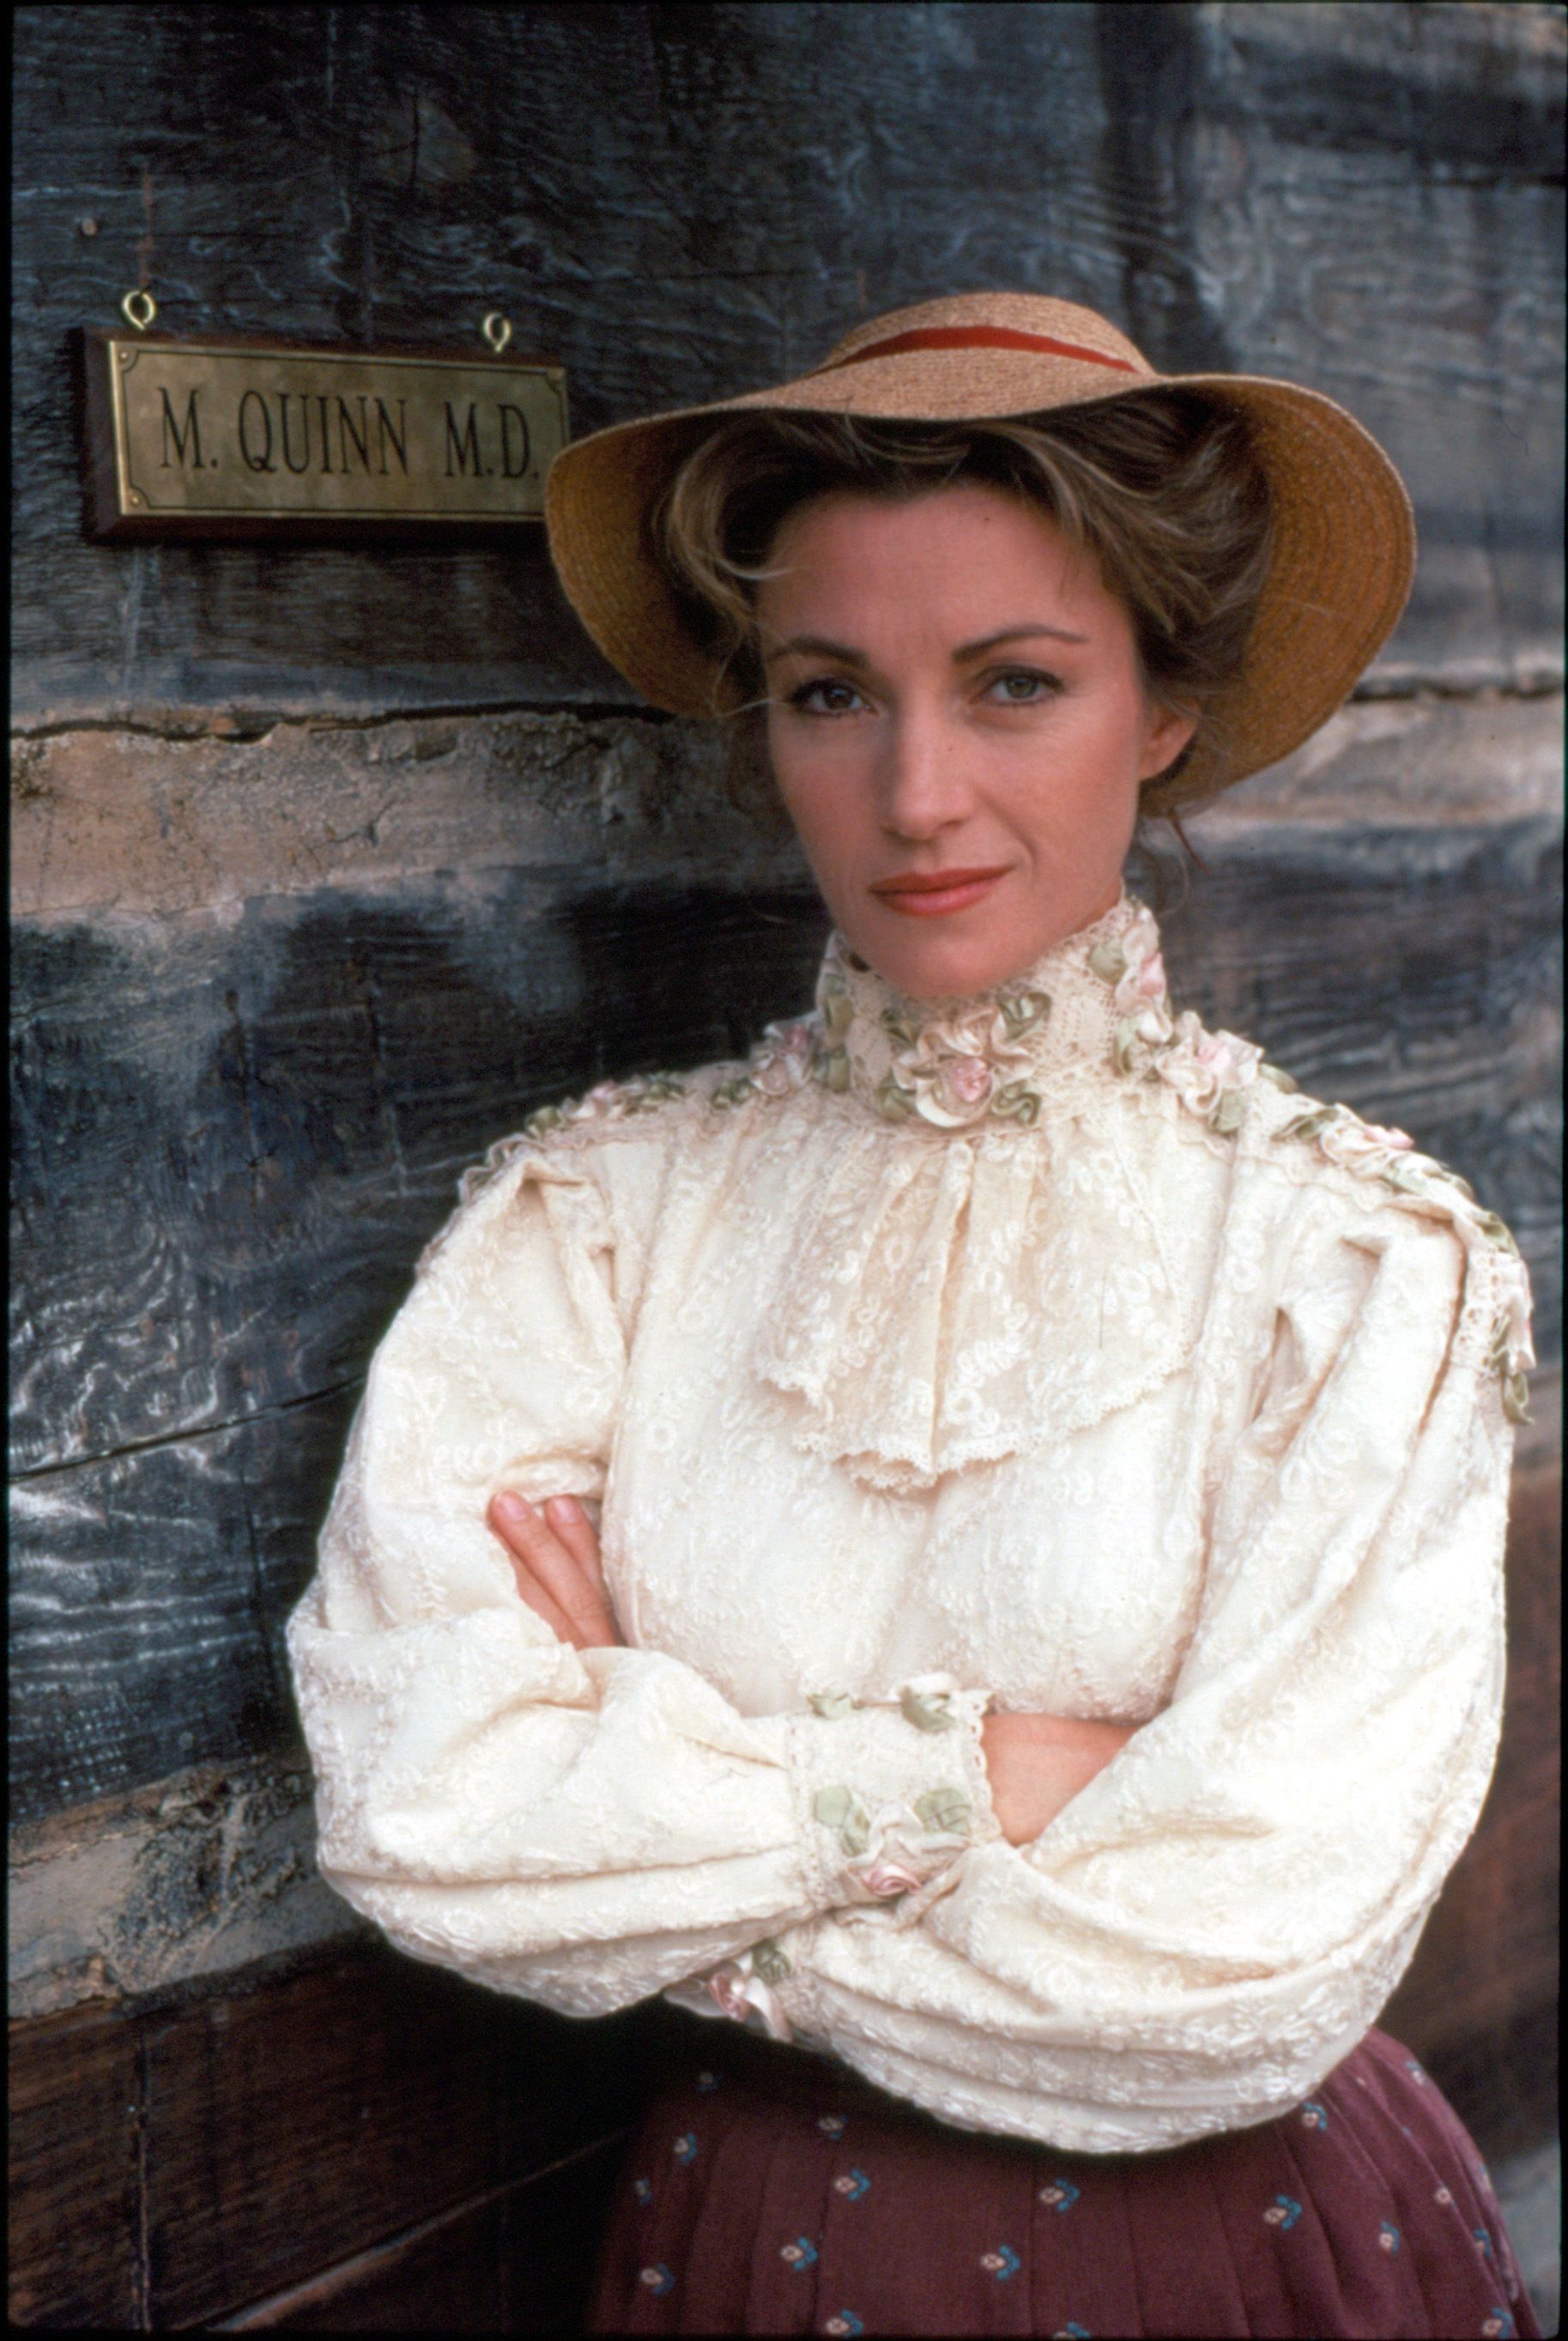 Jane Seymour as Dr. Michaela 'Mike' Quinn, for the television series "Dr. Quinn, Medicine Woman," 1992. | Source: Getty Images